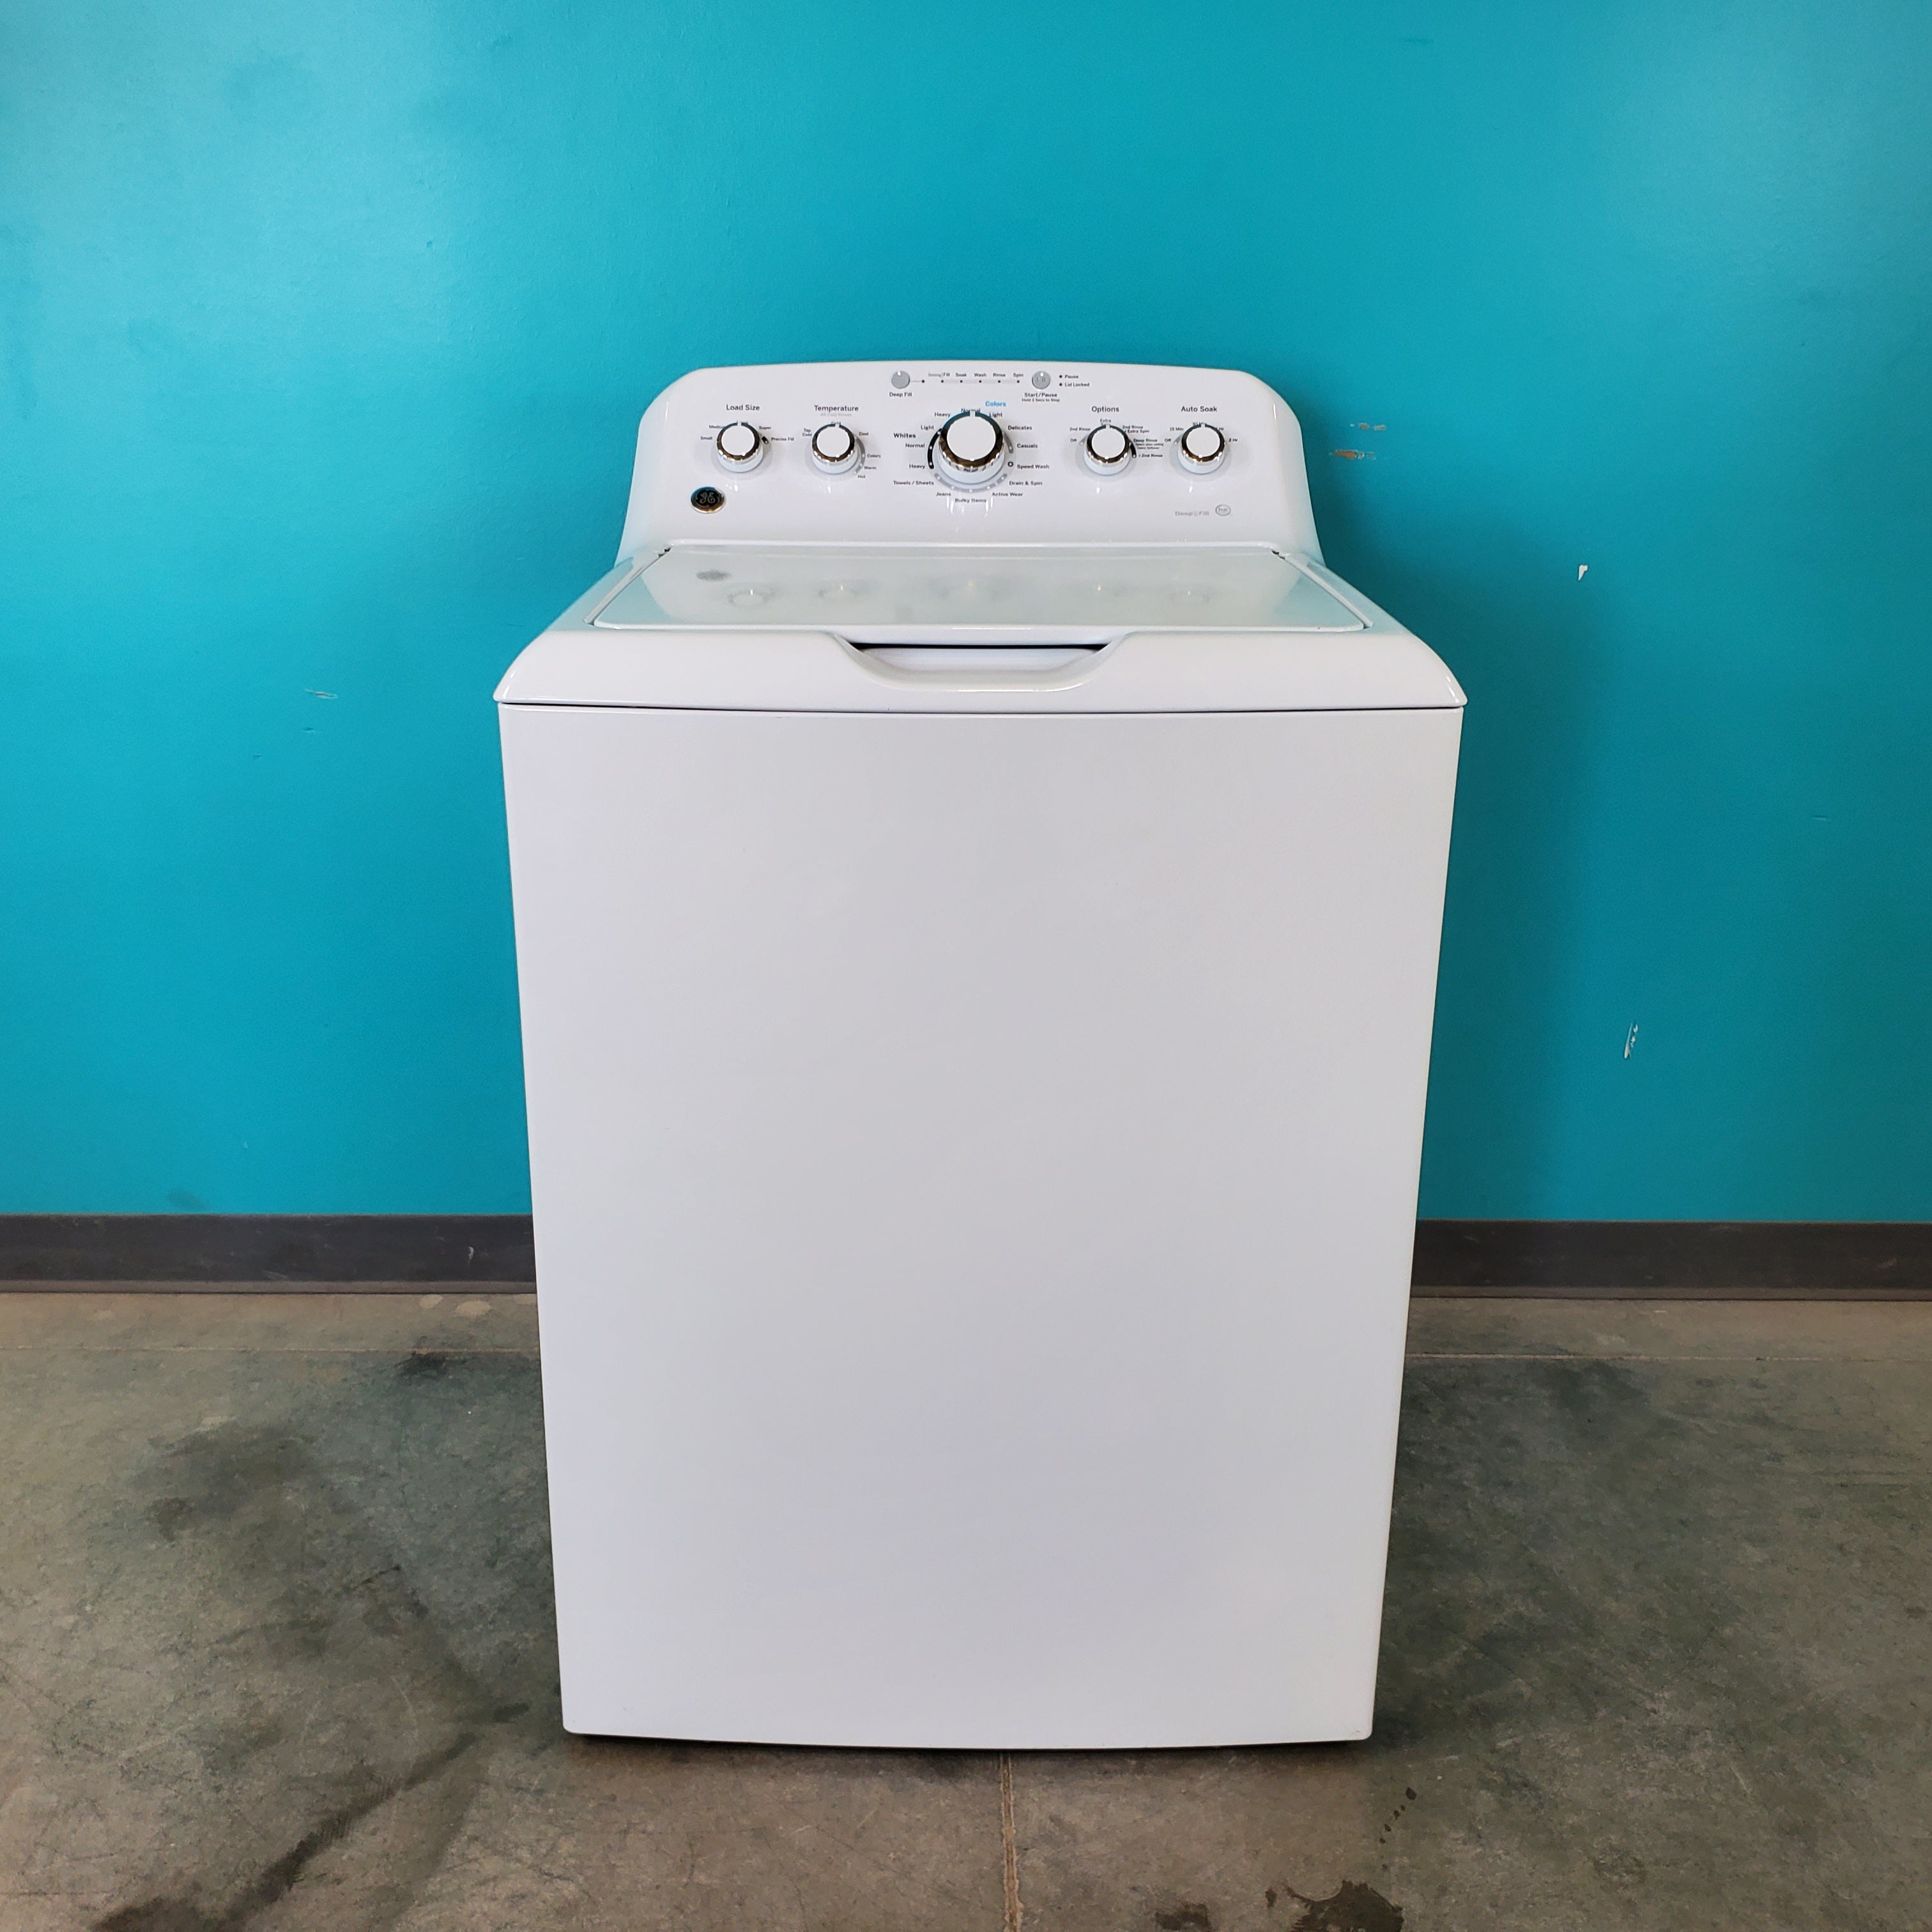 Pictures of Neu Select GE High Capacity 4.2 cu. ft. Agitator Top Load HE Washing Machine With Extra Water Cycle / Option - Certified Refurbished - Neu Appliance Outlet - Discount Appliance Outlet in Austin, Tx